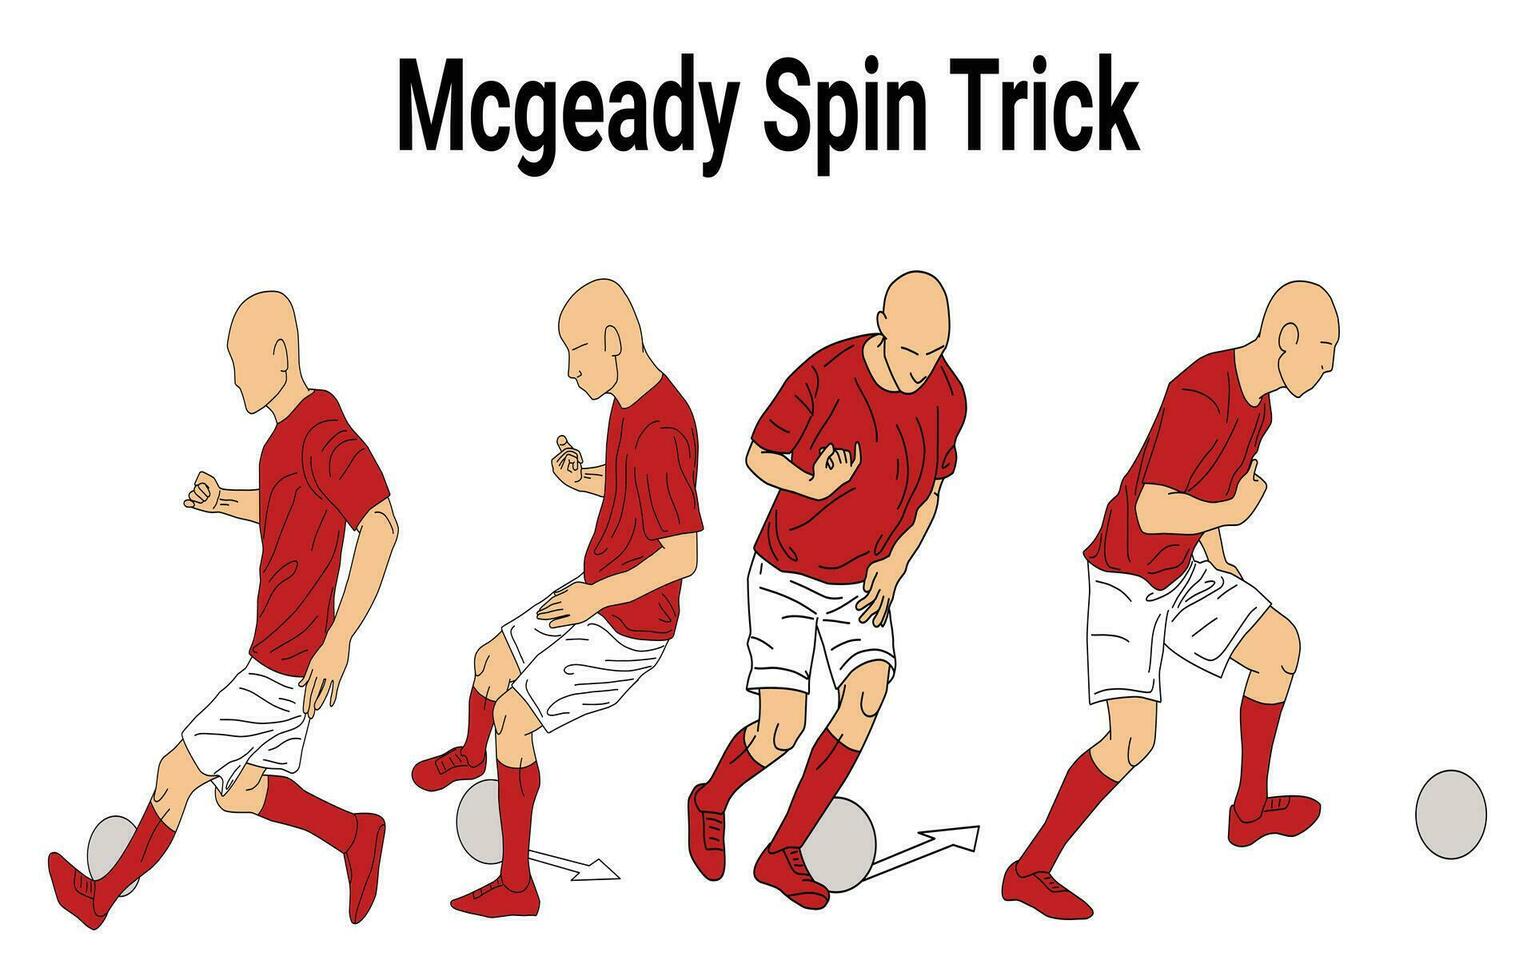 mcgeady spin trick images for football sports education, suitable for sports books, sports manuals, sports applications and others vector